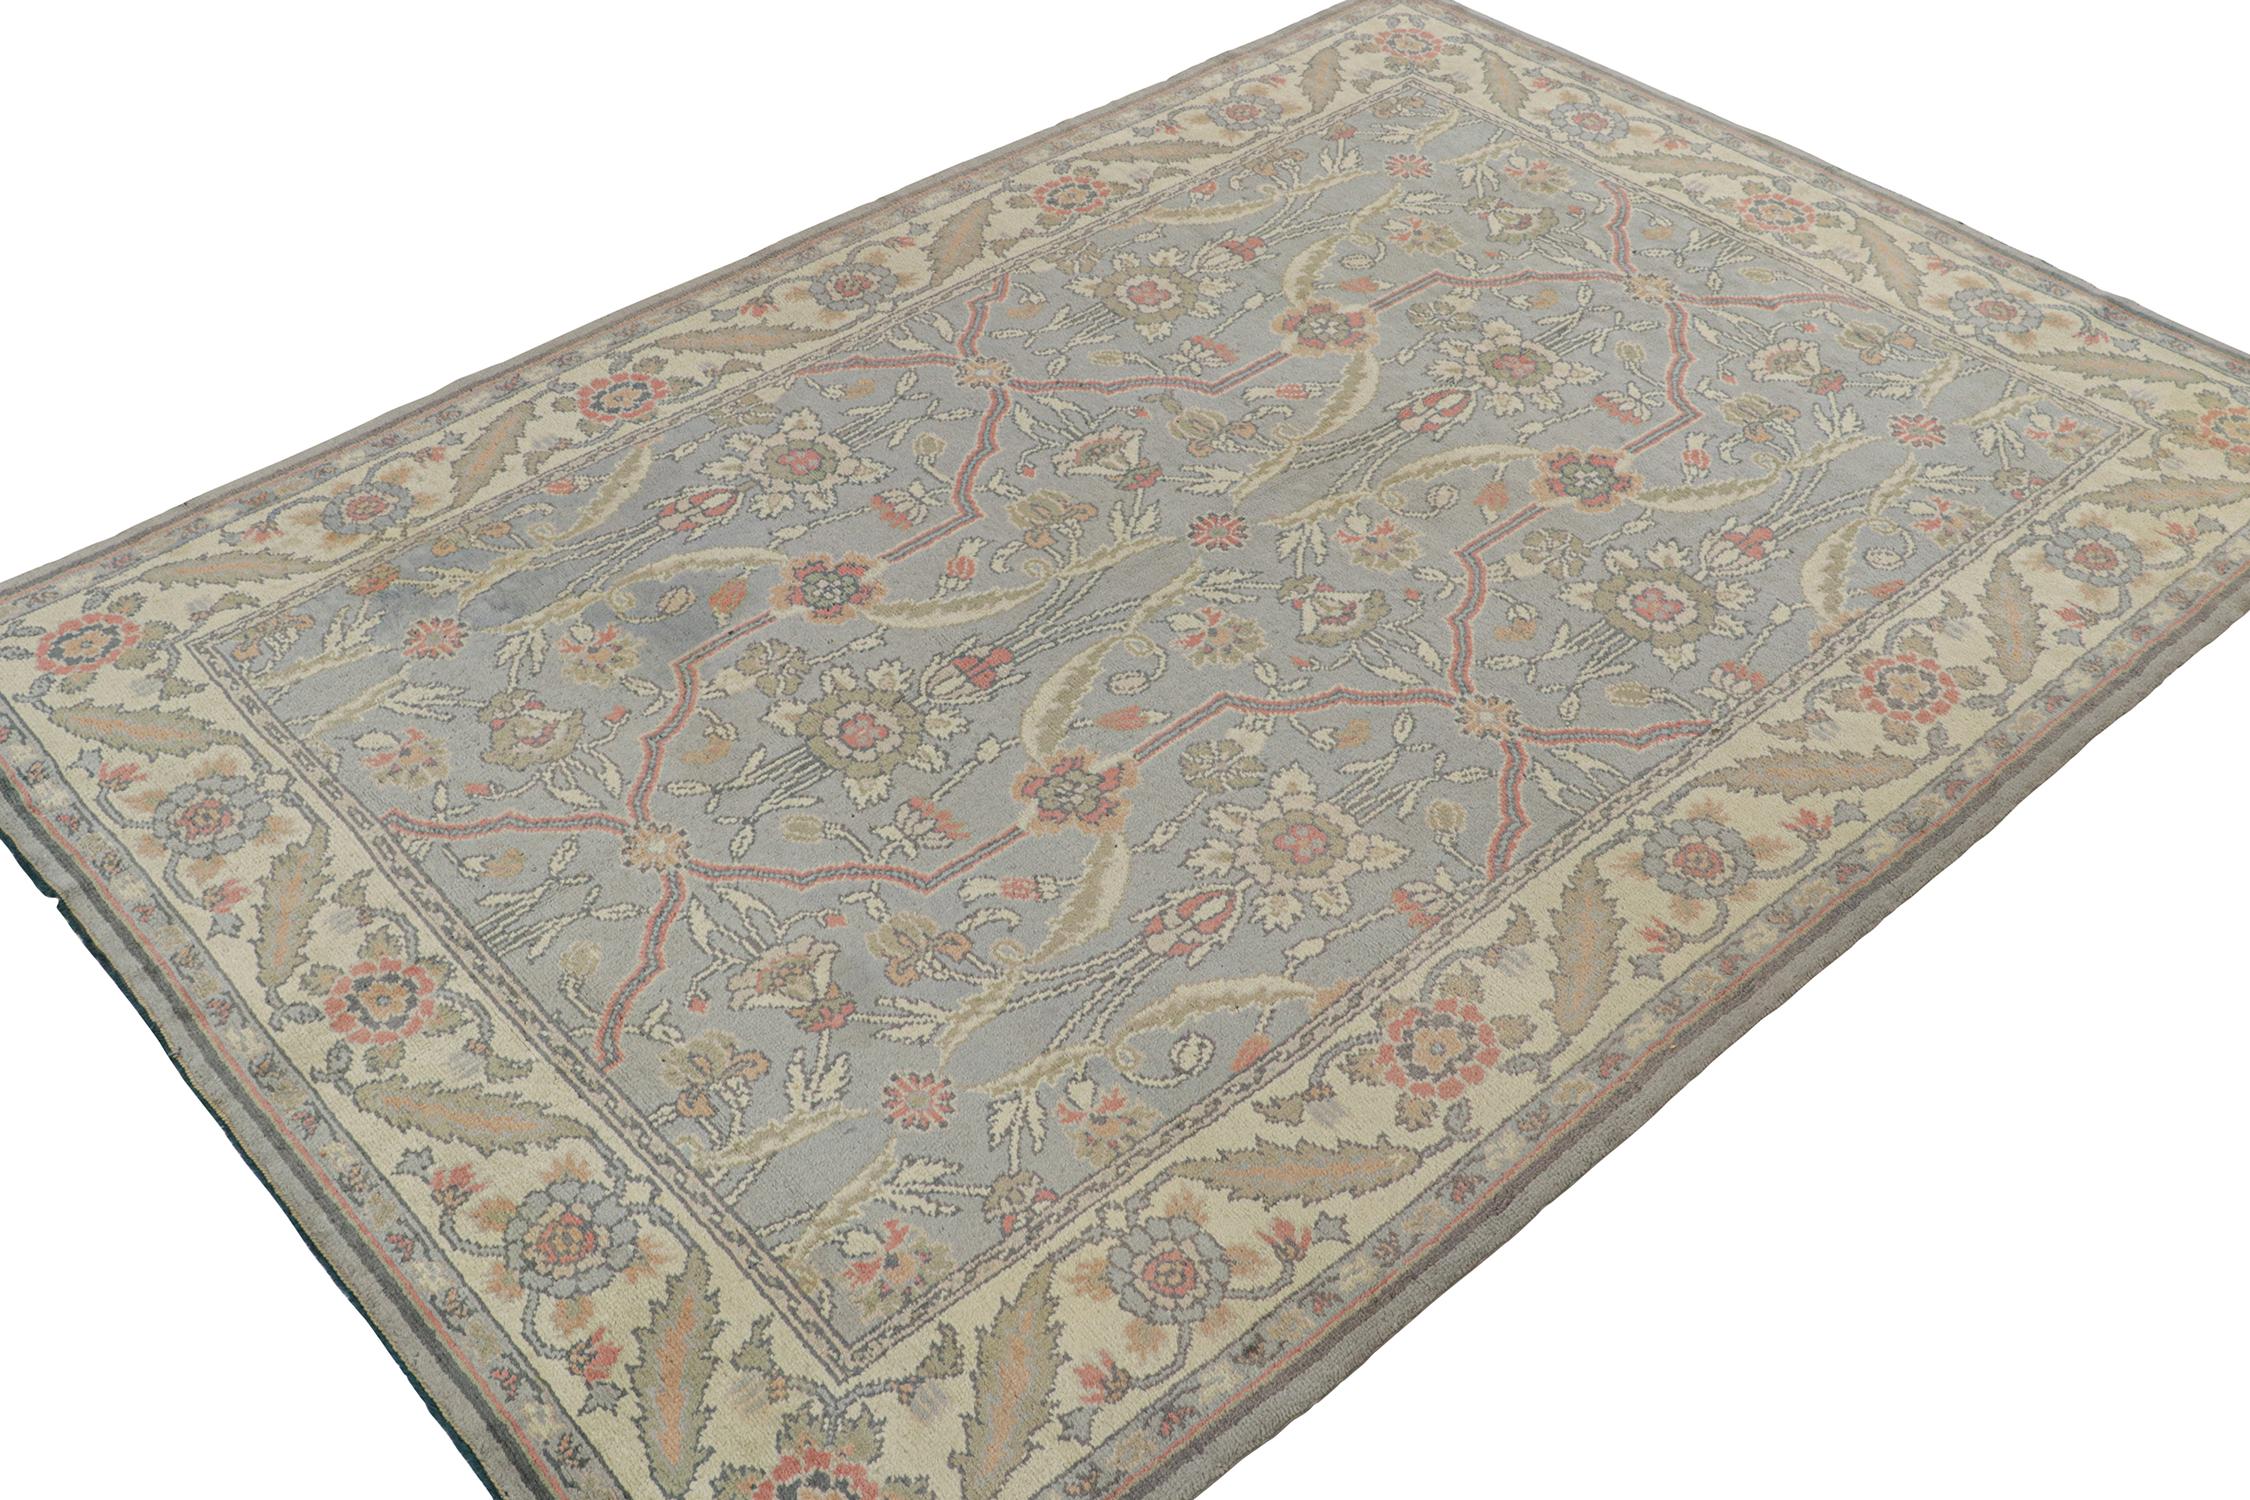 Arts and Crafts Antique Donegal Arts & Crafts Rug in Blue with Floral Patterns For Sale